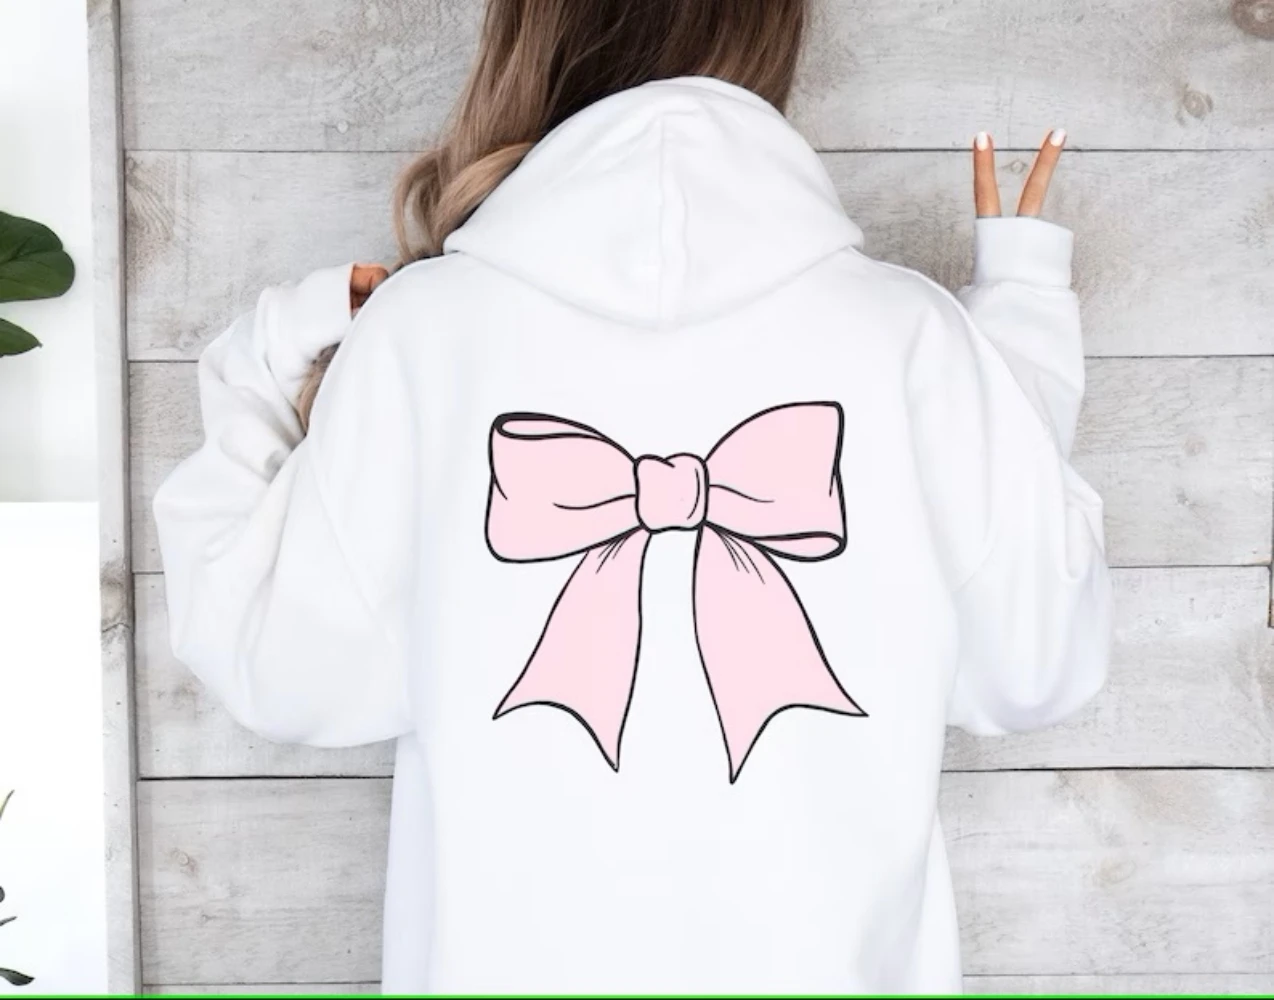 alpha xi delta sweatshirt trendy cherry sorority sweatshirt crewneck alpha xi cherry sorority sweatshirts girly soft pullover Big Bow Sweatshirt Pink Ribbon Cute Y2k Girly Pullover Top Coquette Trendy Aesthetic Crewneck Hoodie Winter Women Clothes